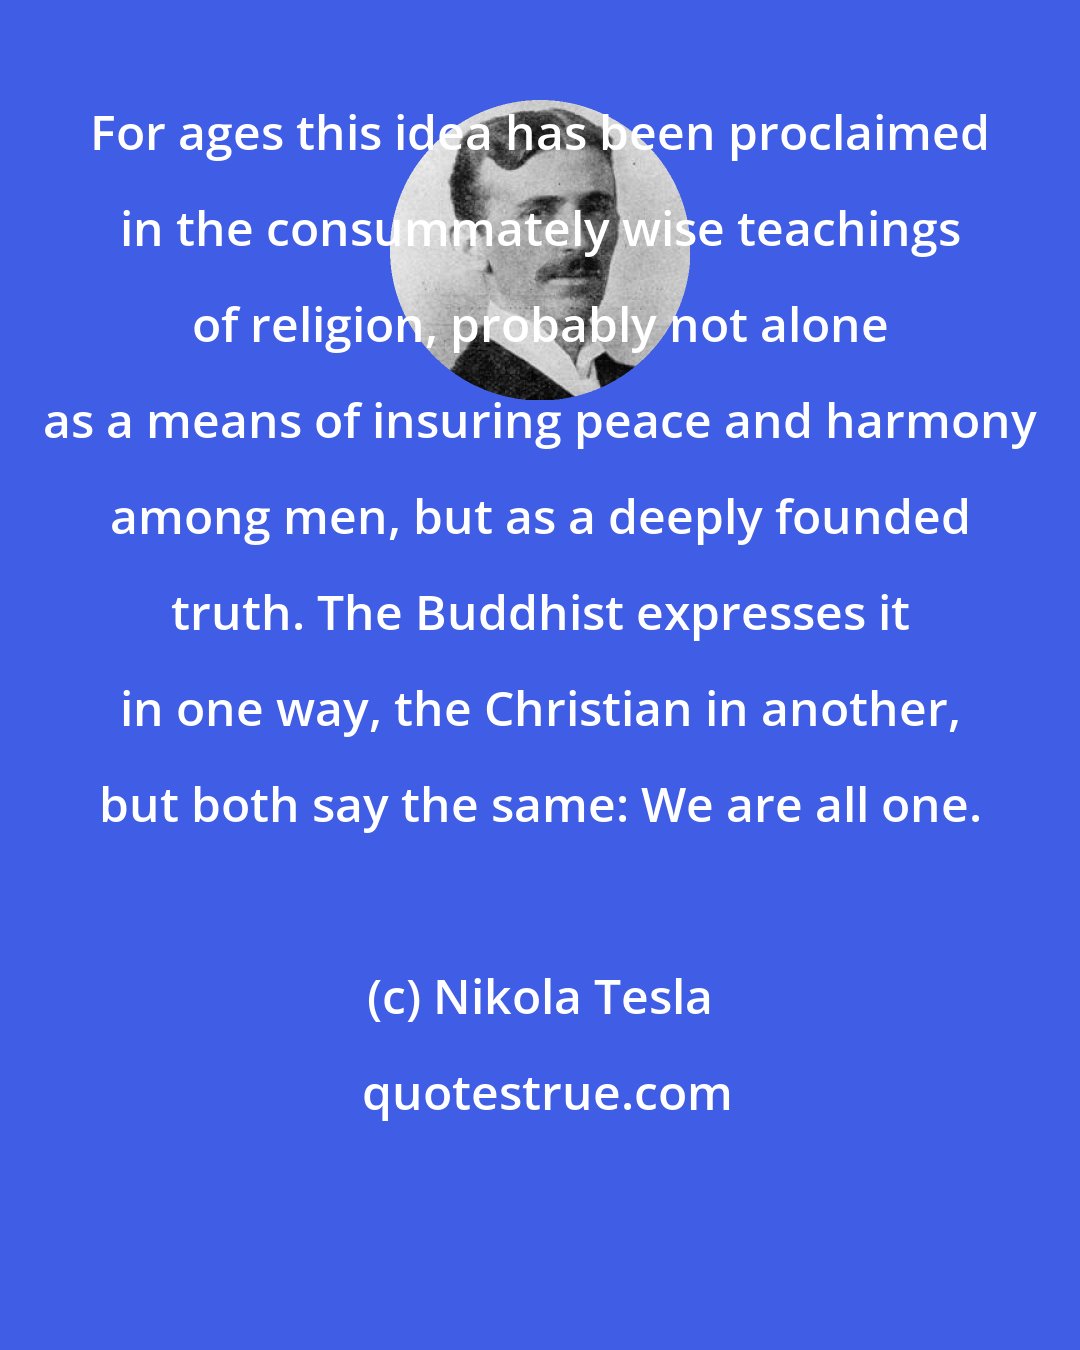 Nikola Tesla: For ages this idea has been proclaimed in the consummately wise teachings of religion, probably not alone as a means of insuring peace and harmony among men, but as a deeply founded truth. The Buddhist expresses it in one way, the Christian in another, but both say the same: We are all one.